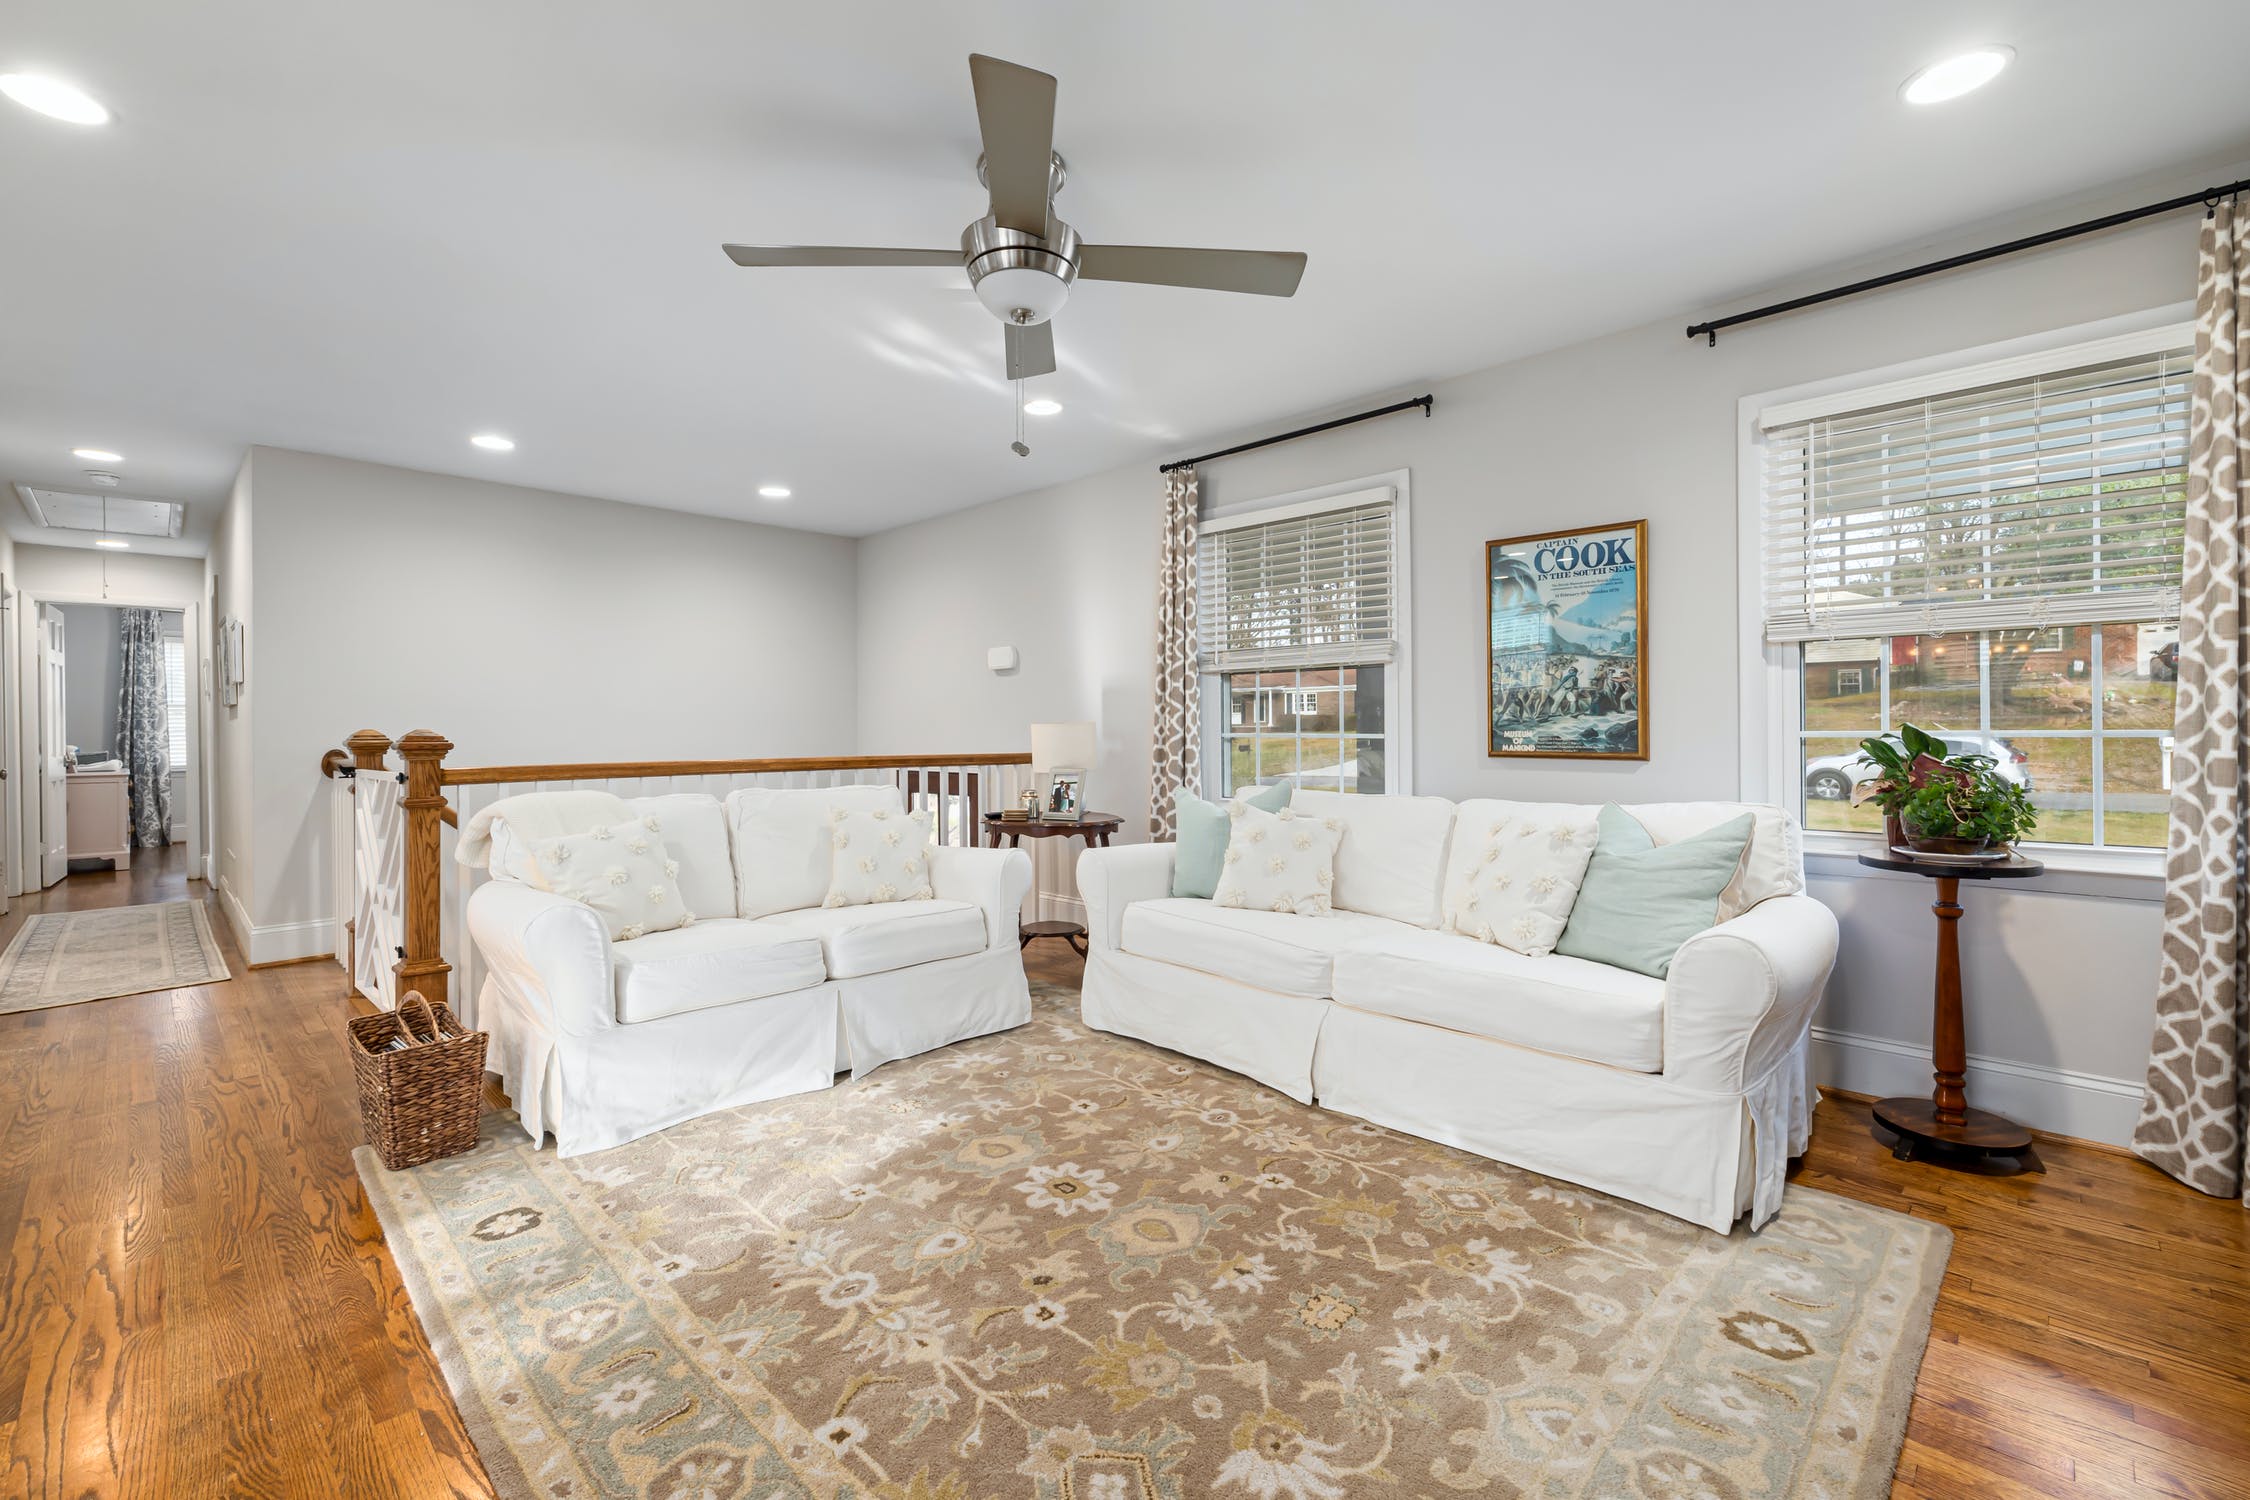 Living room with new Ceiling Fan Installation in Dallas, Arlington, TX, Mansfield, TX, and Surrounding Areas